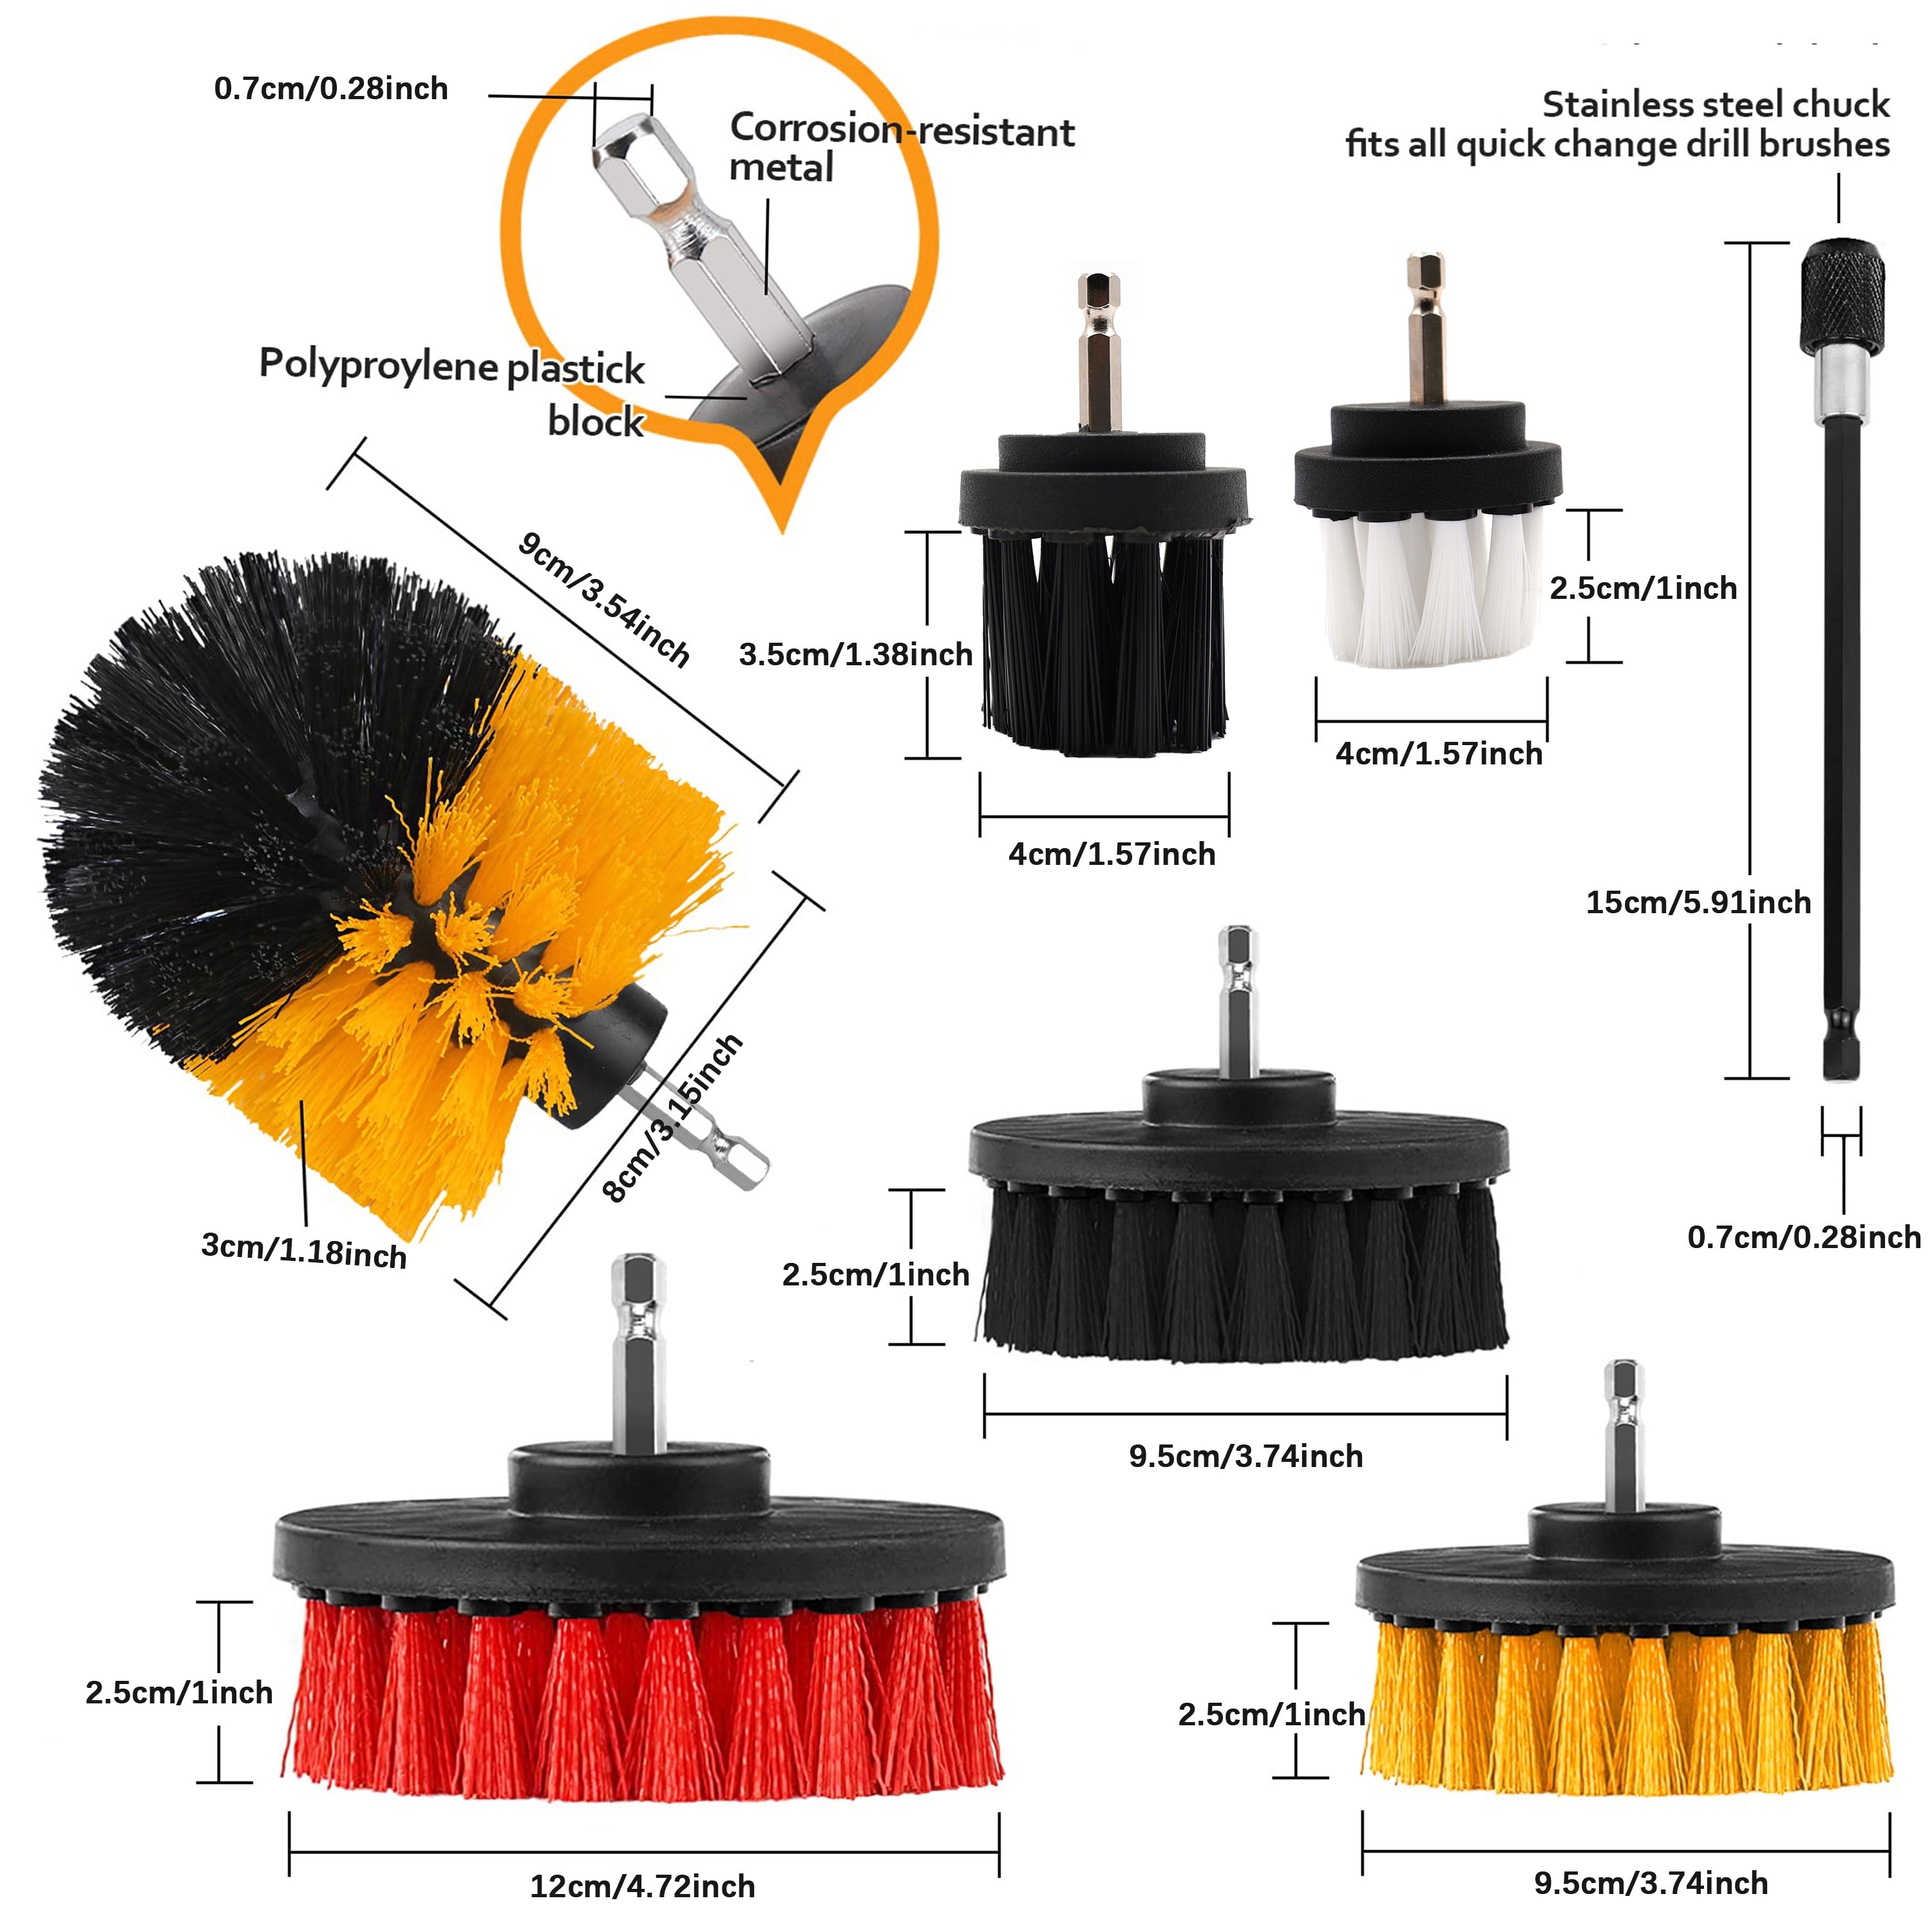 5pcs/set Small Drill Brush Kit, Electric Car Washer Cleaning Brush Tool Set,  General Purpose Cleaning Drill Brush, Made Of Pp Material, Can Be Connected  To Electric Drill For Use, Replaceable In Various